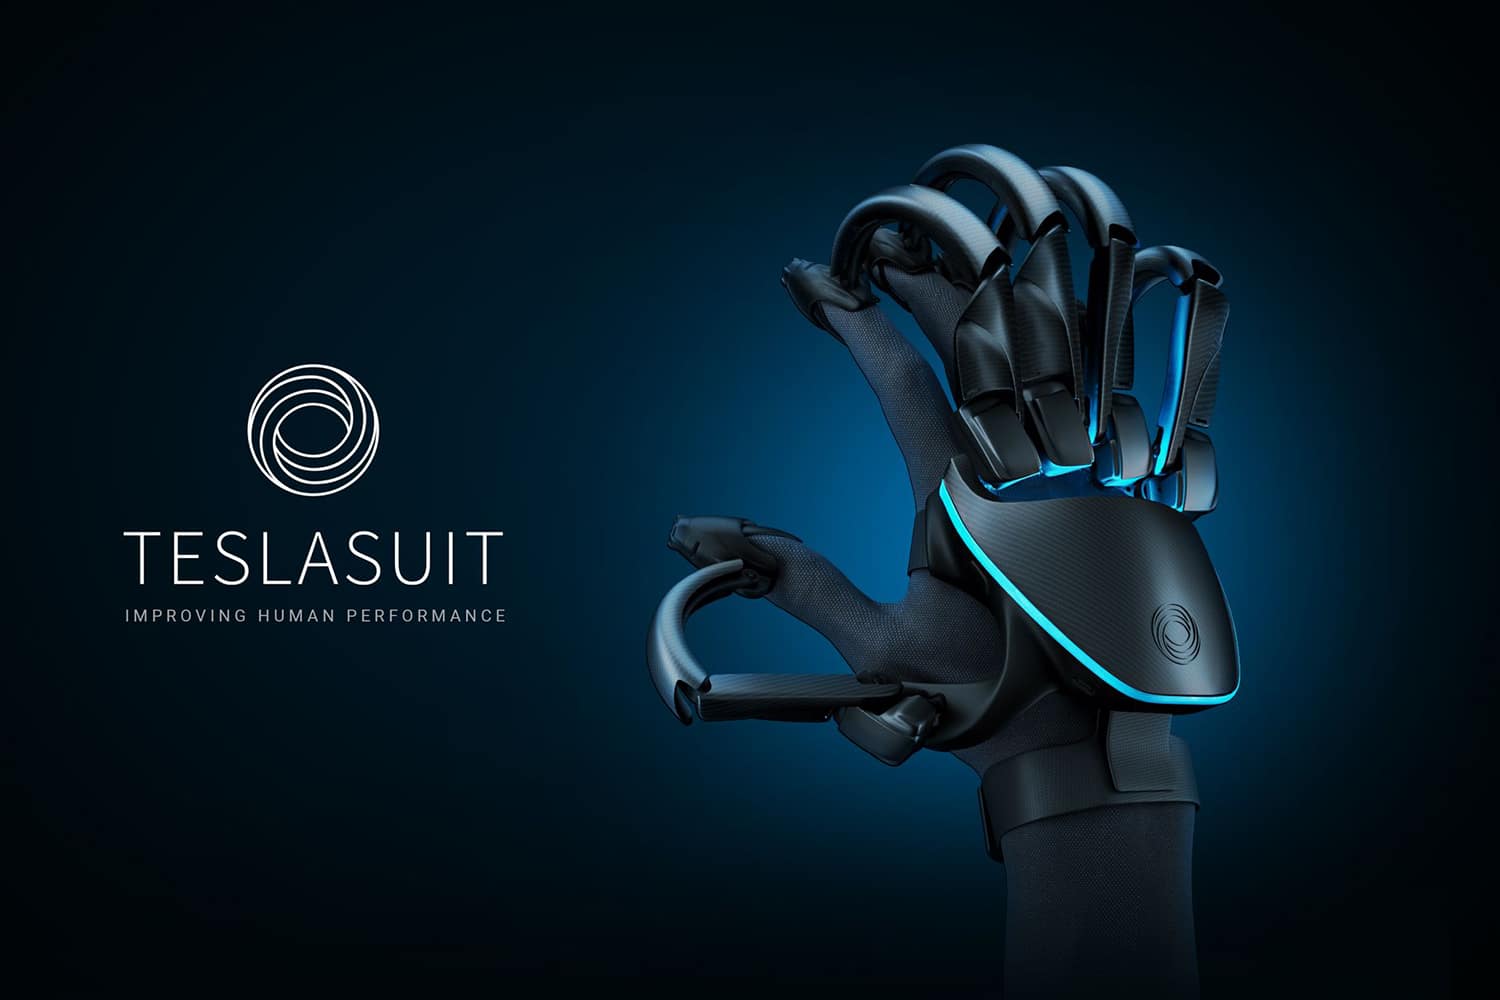 TESLASUIT GLOVE, the VR glove to feel textures and VR objects